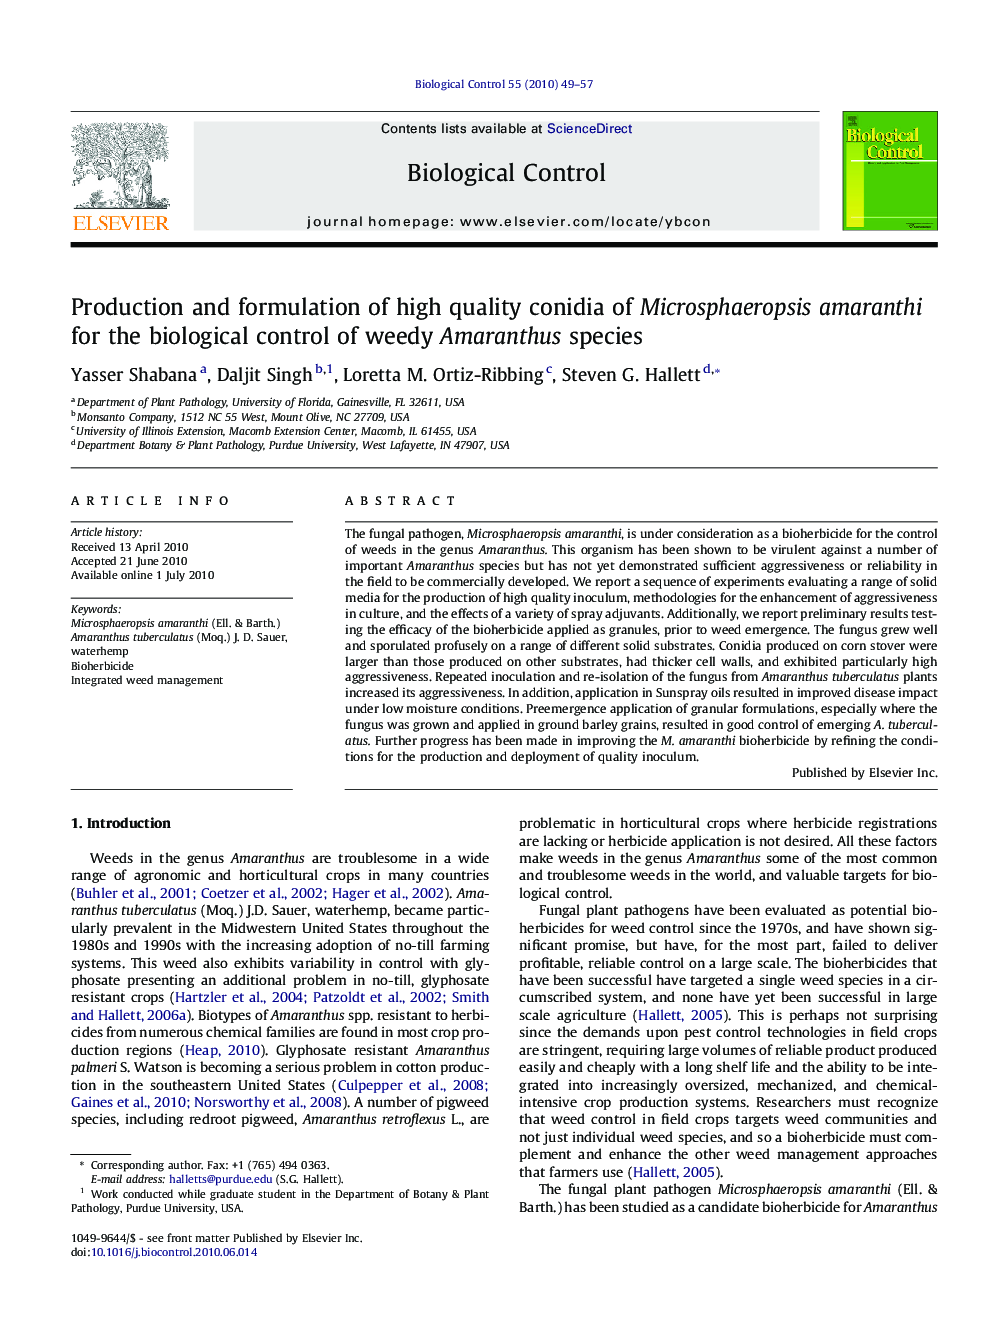 Production and formulation of high quality conidia of Microsphaeropsis amaranthi for the biological control of weedy Amaranthus species